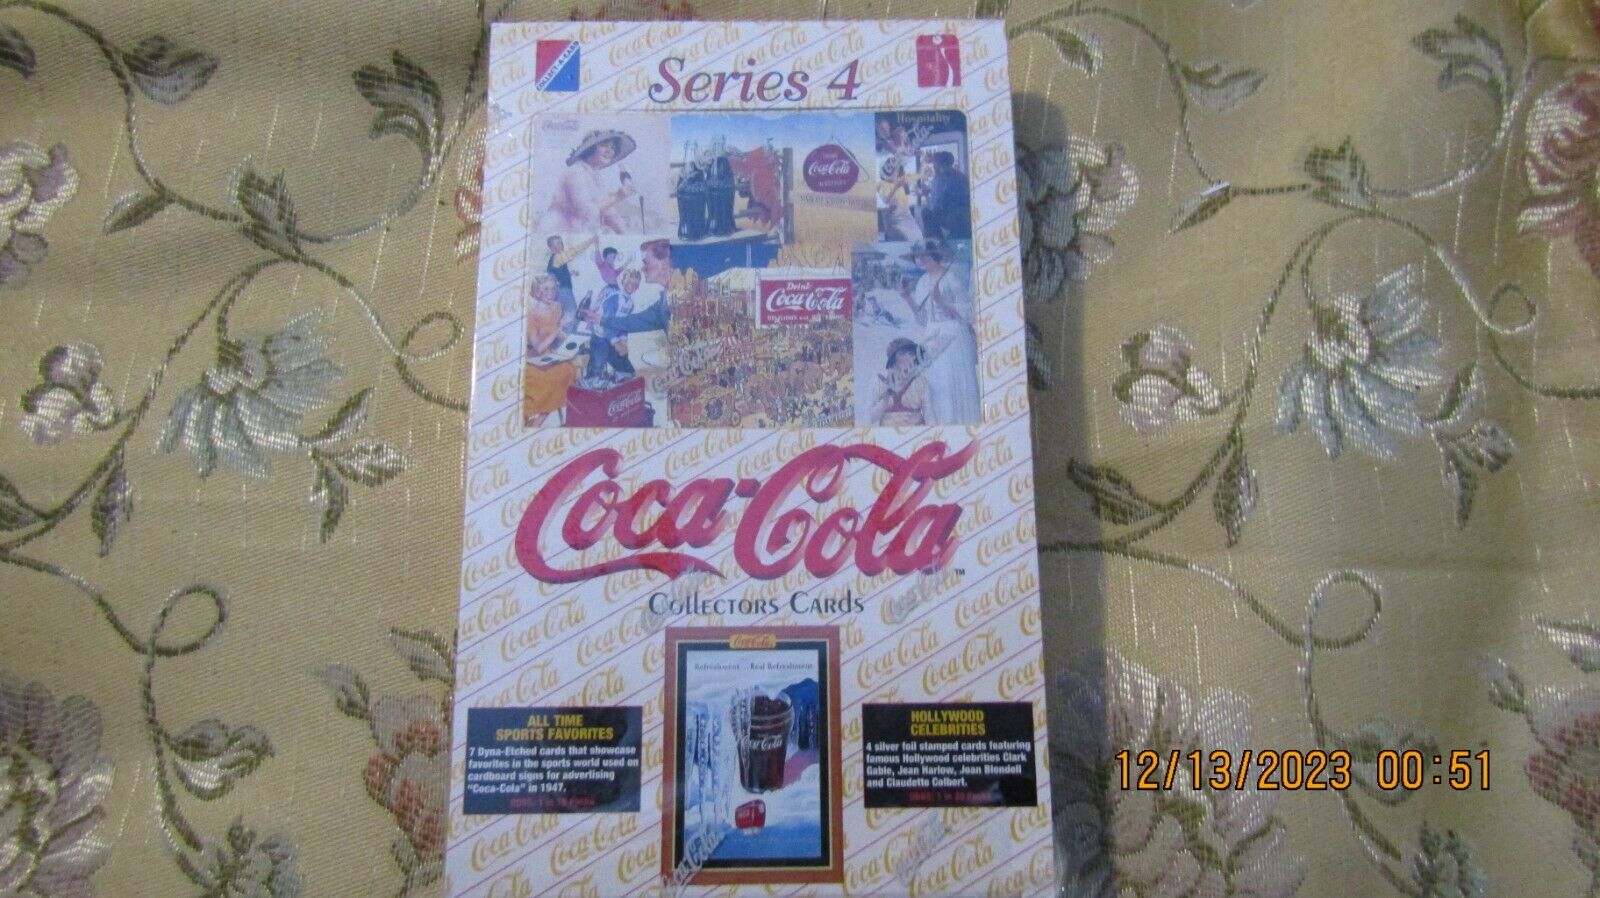 ©1995 Vintage Coca Cola Series 4 Collectors Trading Cards 36 Packs / Box Sealed